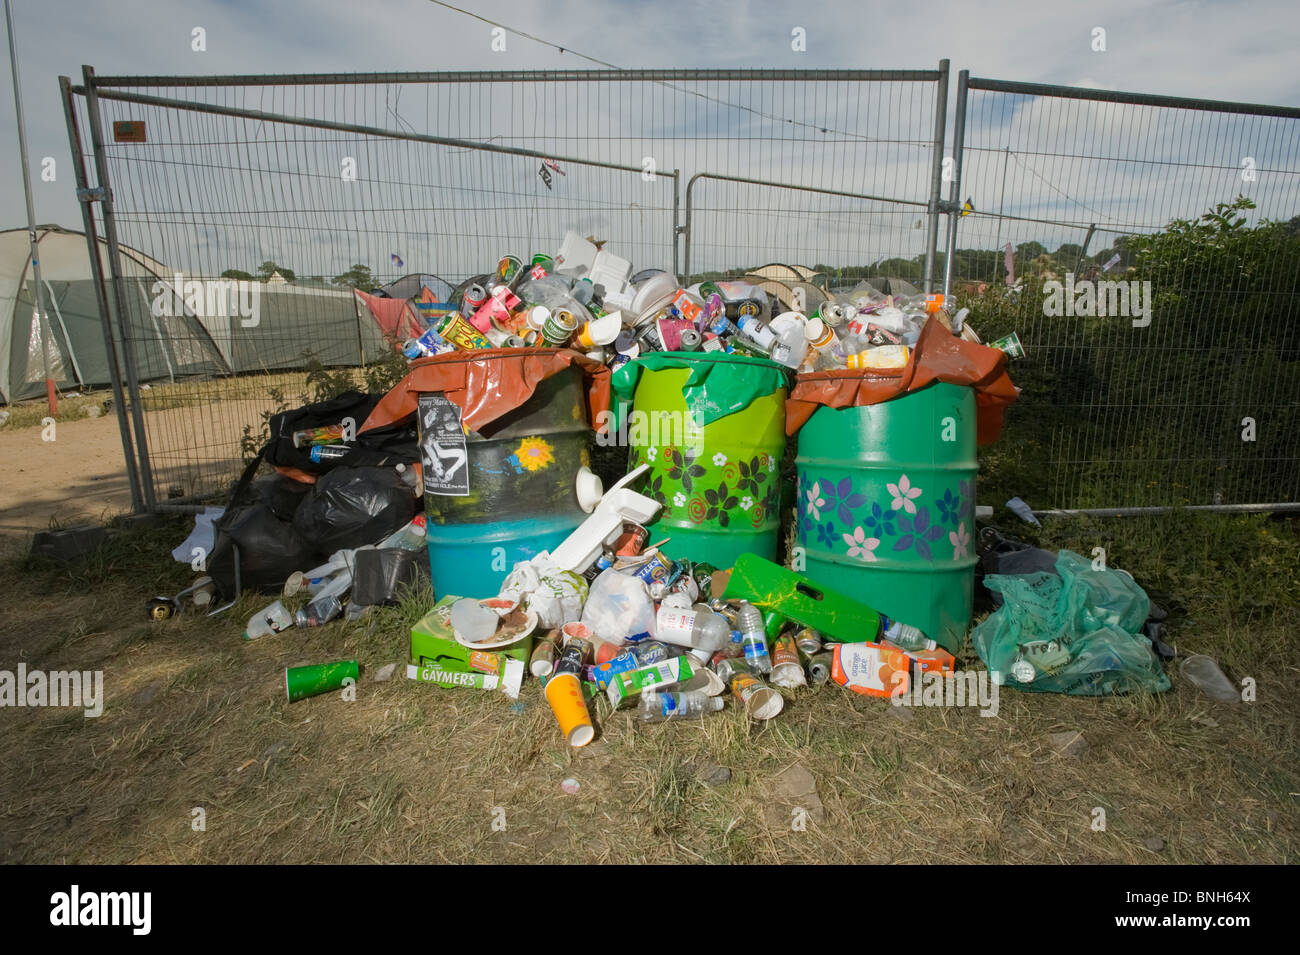 Rubbish / Garbage awaiting collection at the Glastonbury Festival, England, 2010 Stock Photo